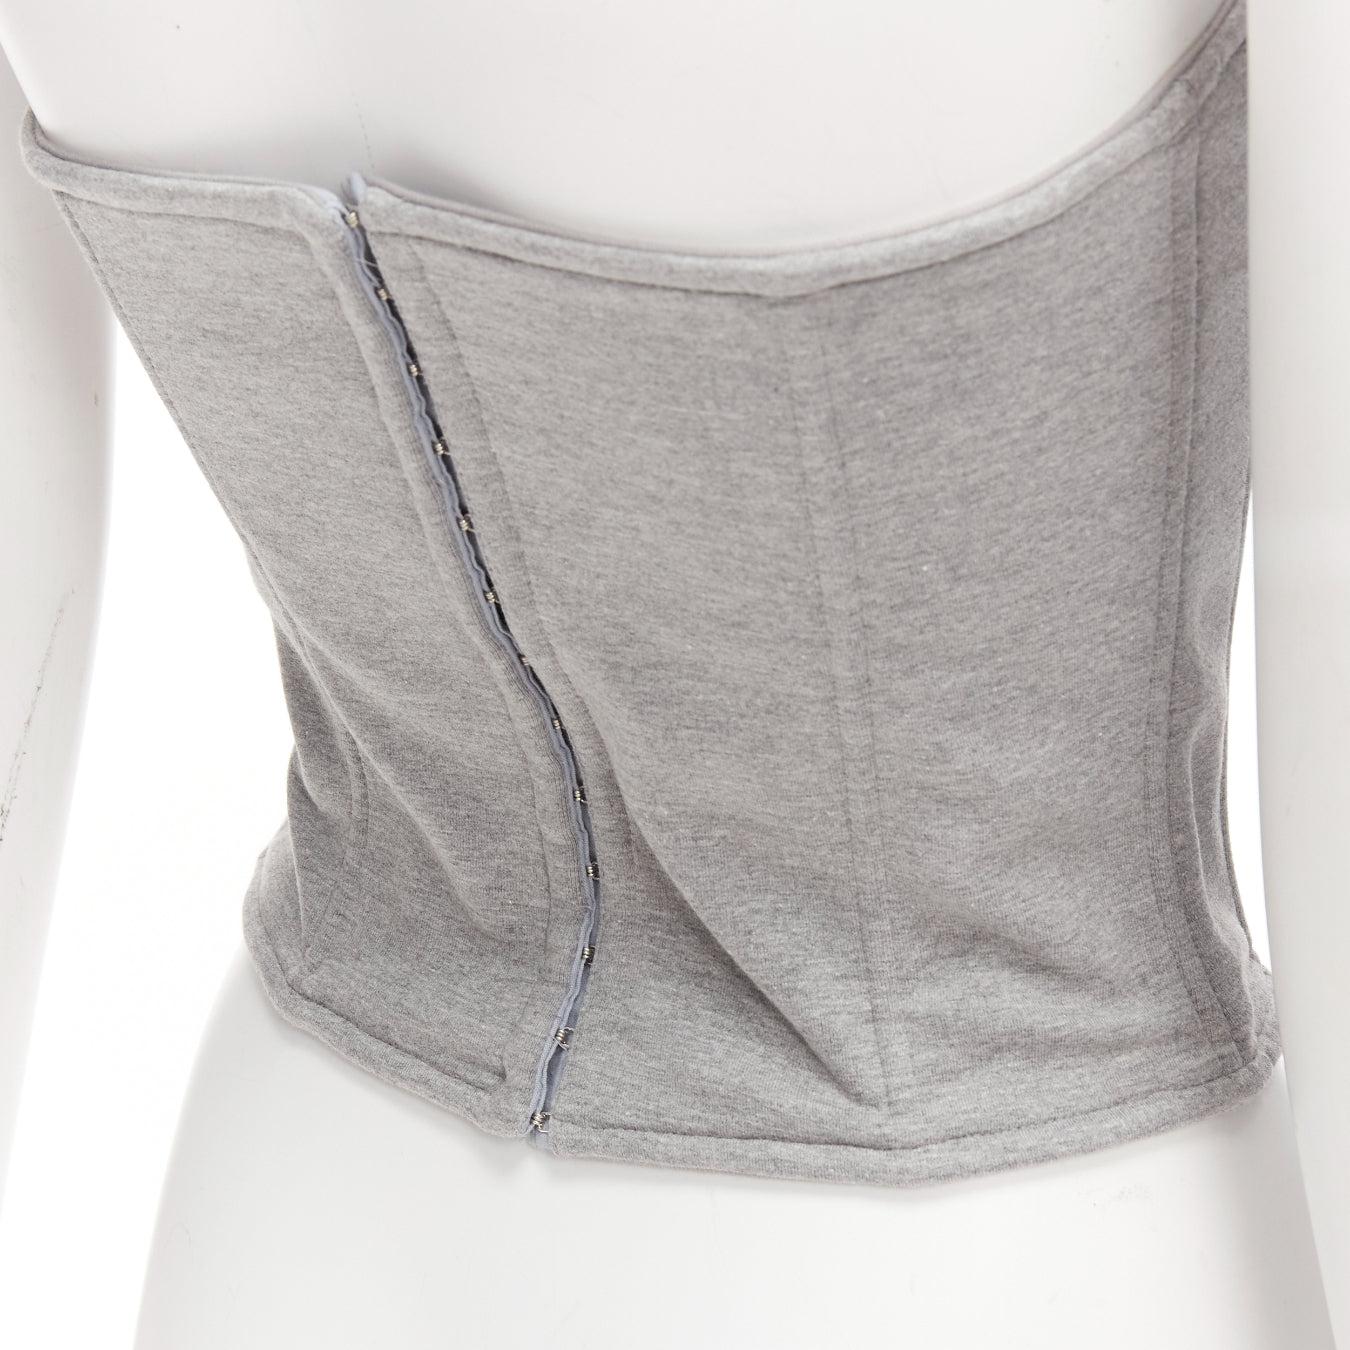 MAGDA BUTRYM 2022 grey cotton blend circular bra boned corset top FR34 XS
Reference: LNKO/A02354
Brand: Magda Butrym
Collection: SS 2022
Material: Cotton, Blend
Color: Grey
Pattern: Solid
Closure: Hook & Bar
Lining: Grey Fabric
Extra Details: Boned